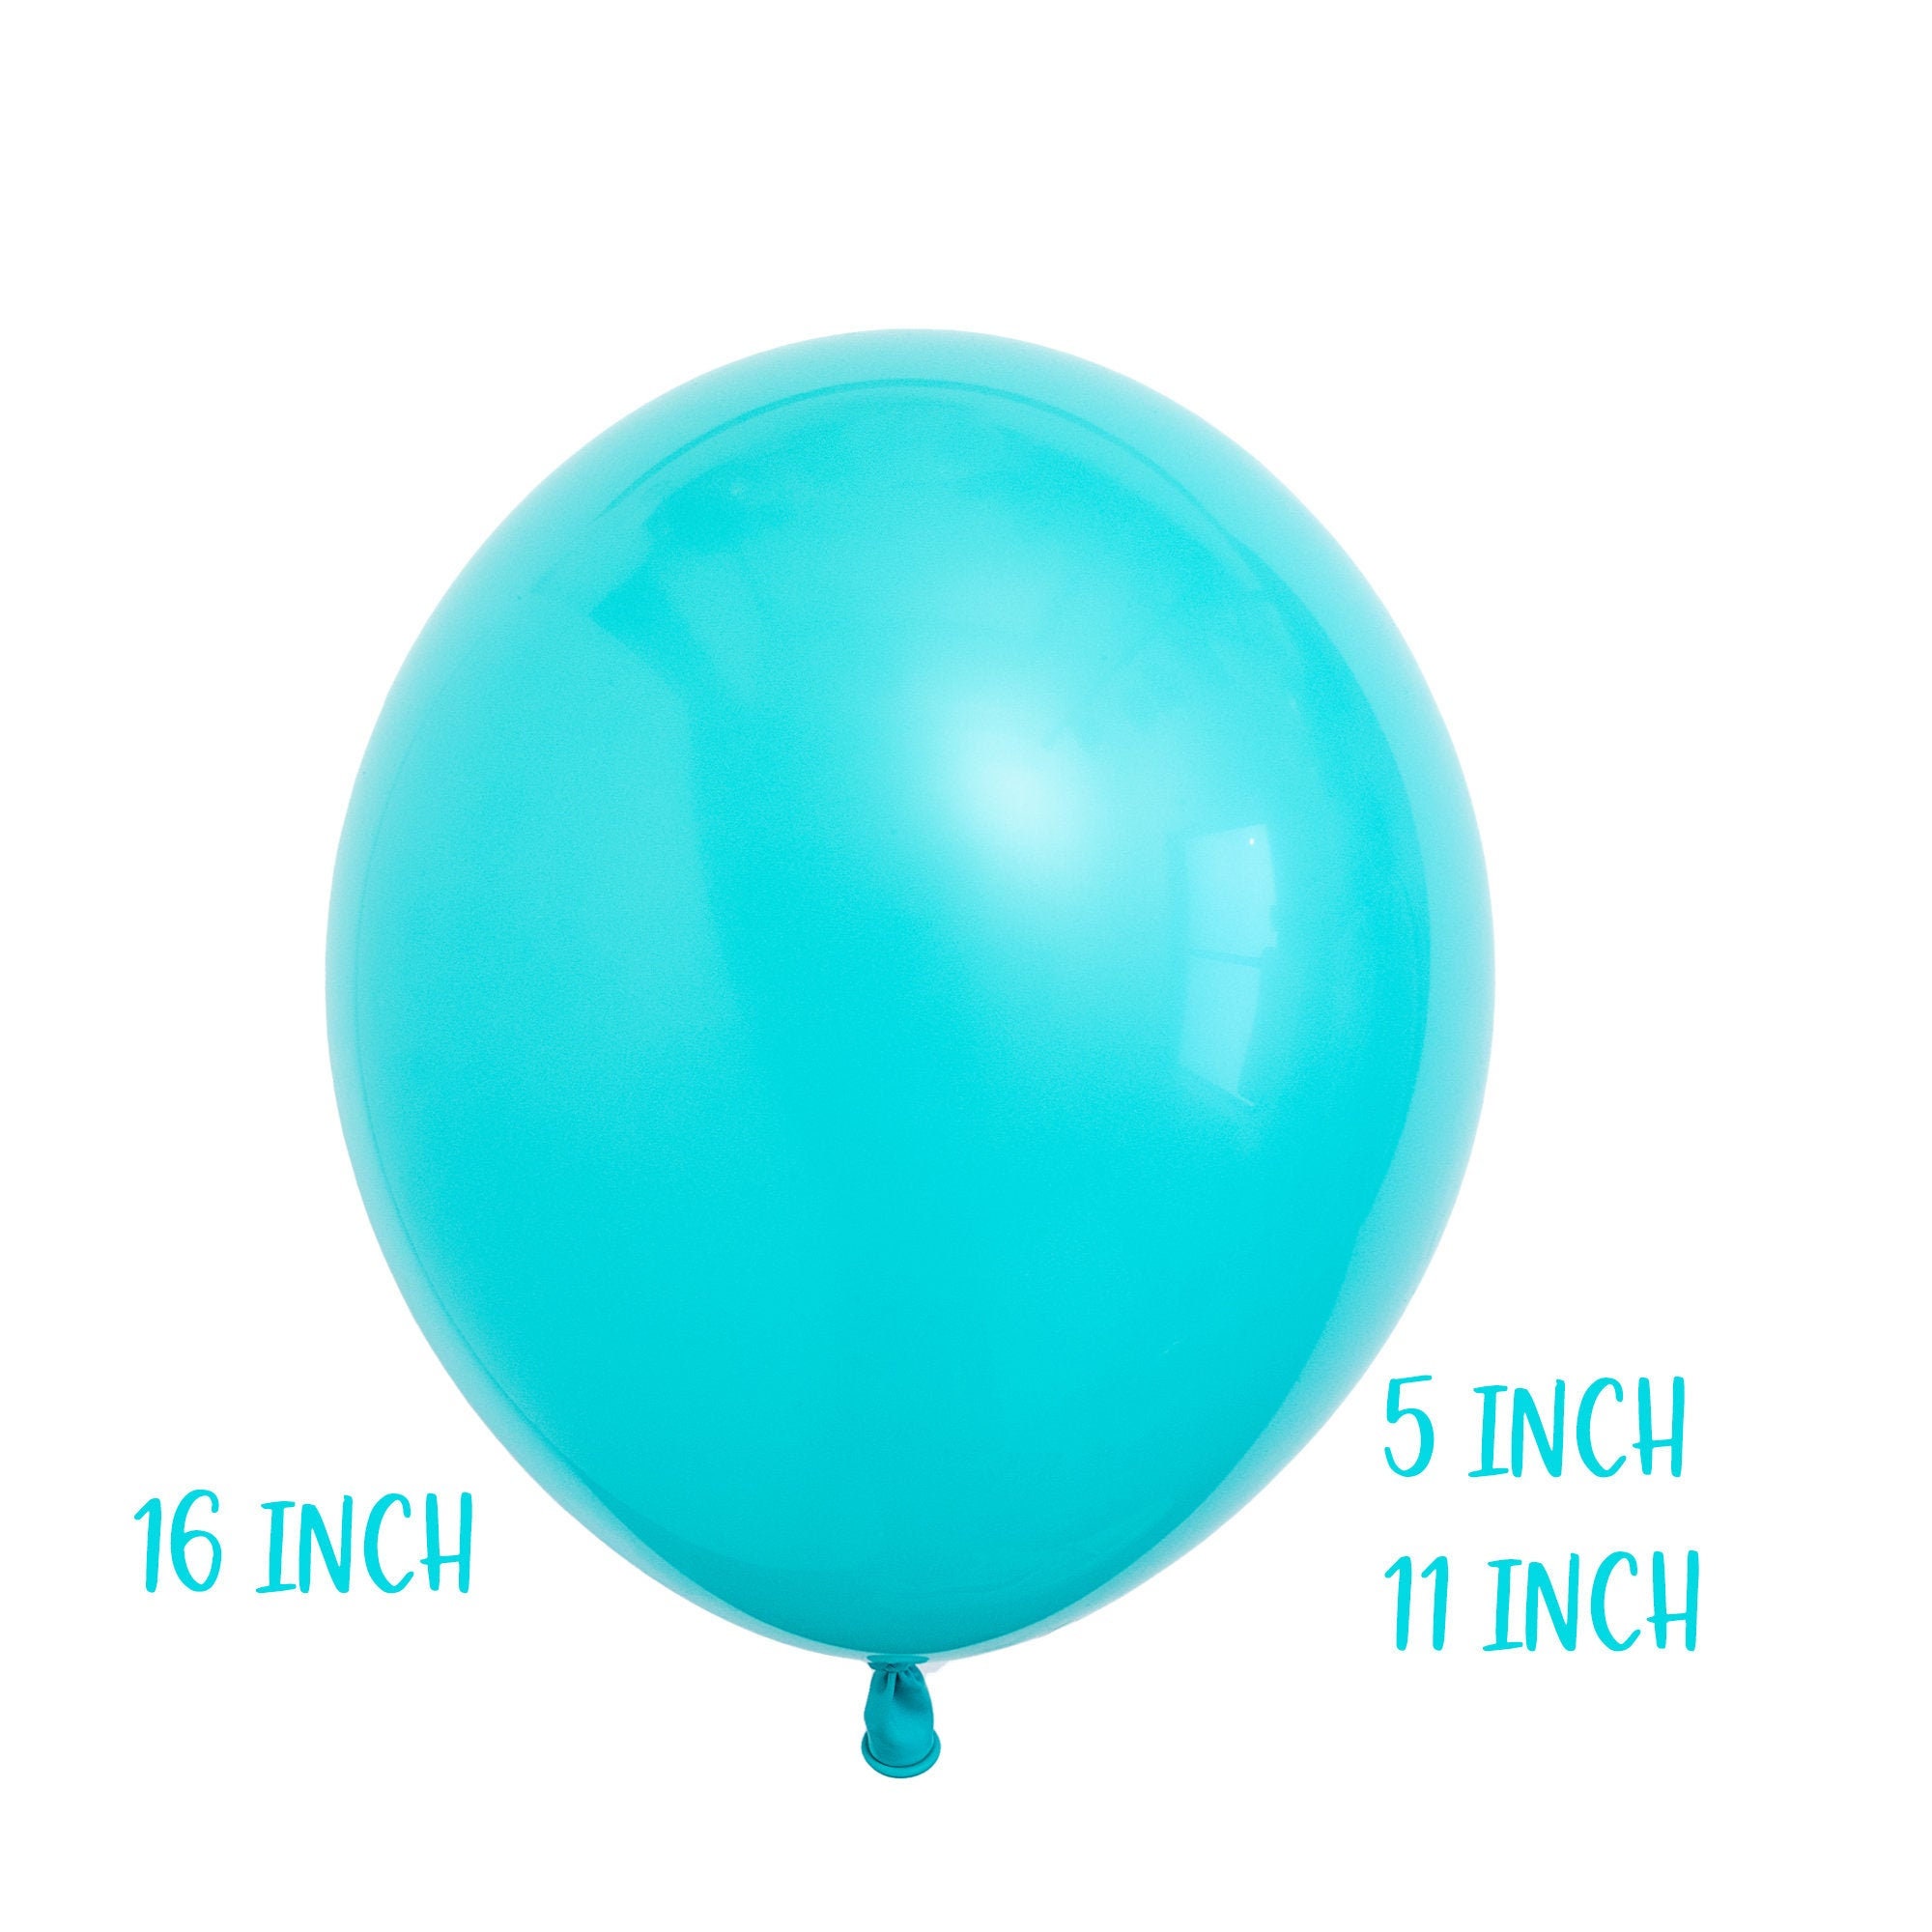 10 latex 5'' Inch Qualatex Printed Modelling Balloons Party Supplies 15 designs 